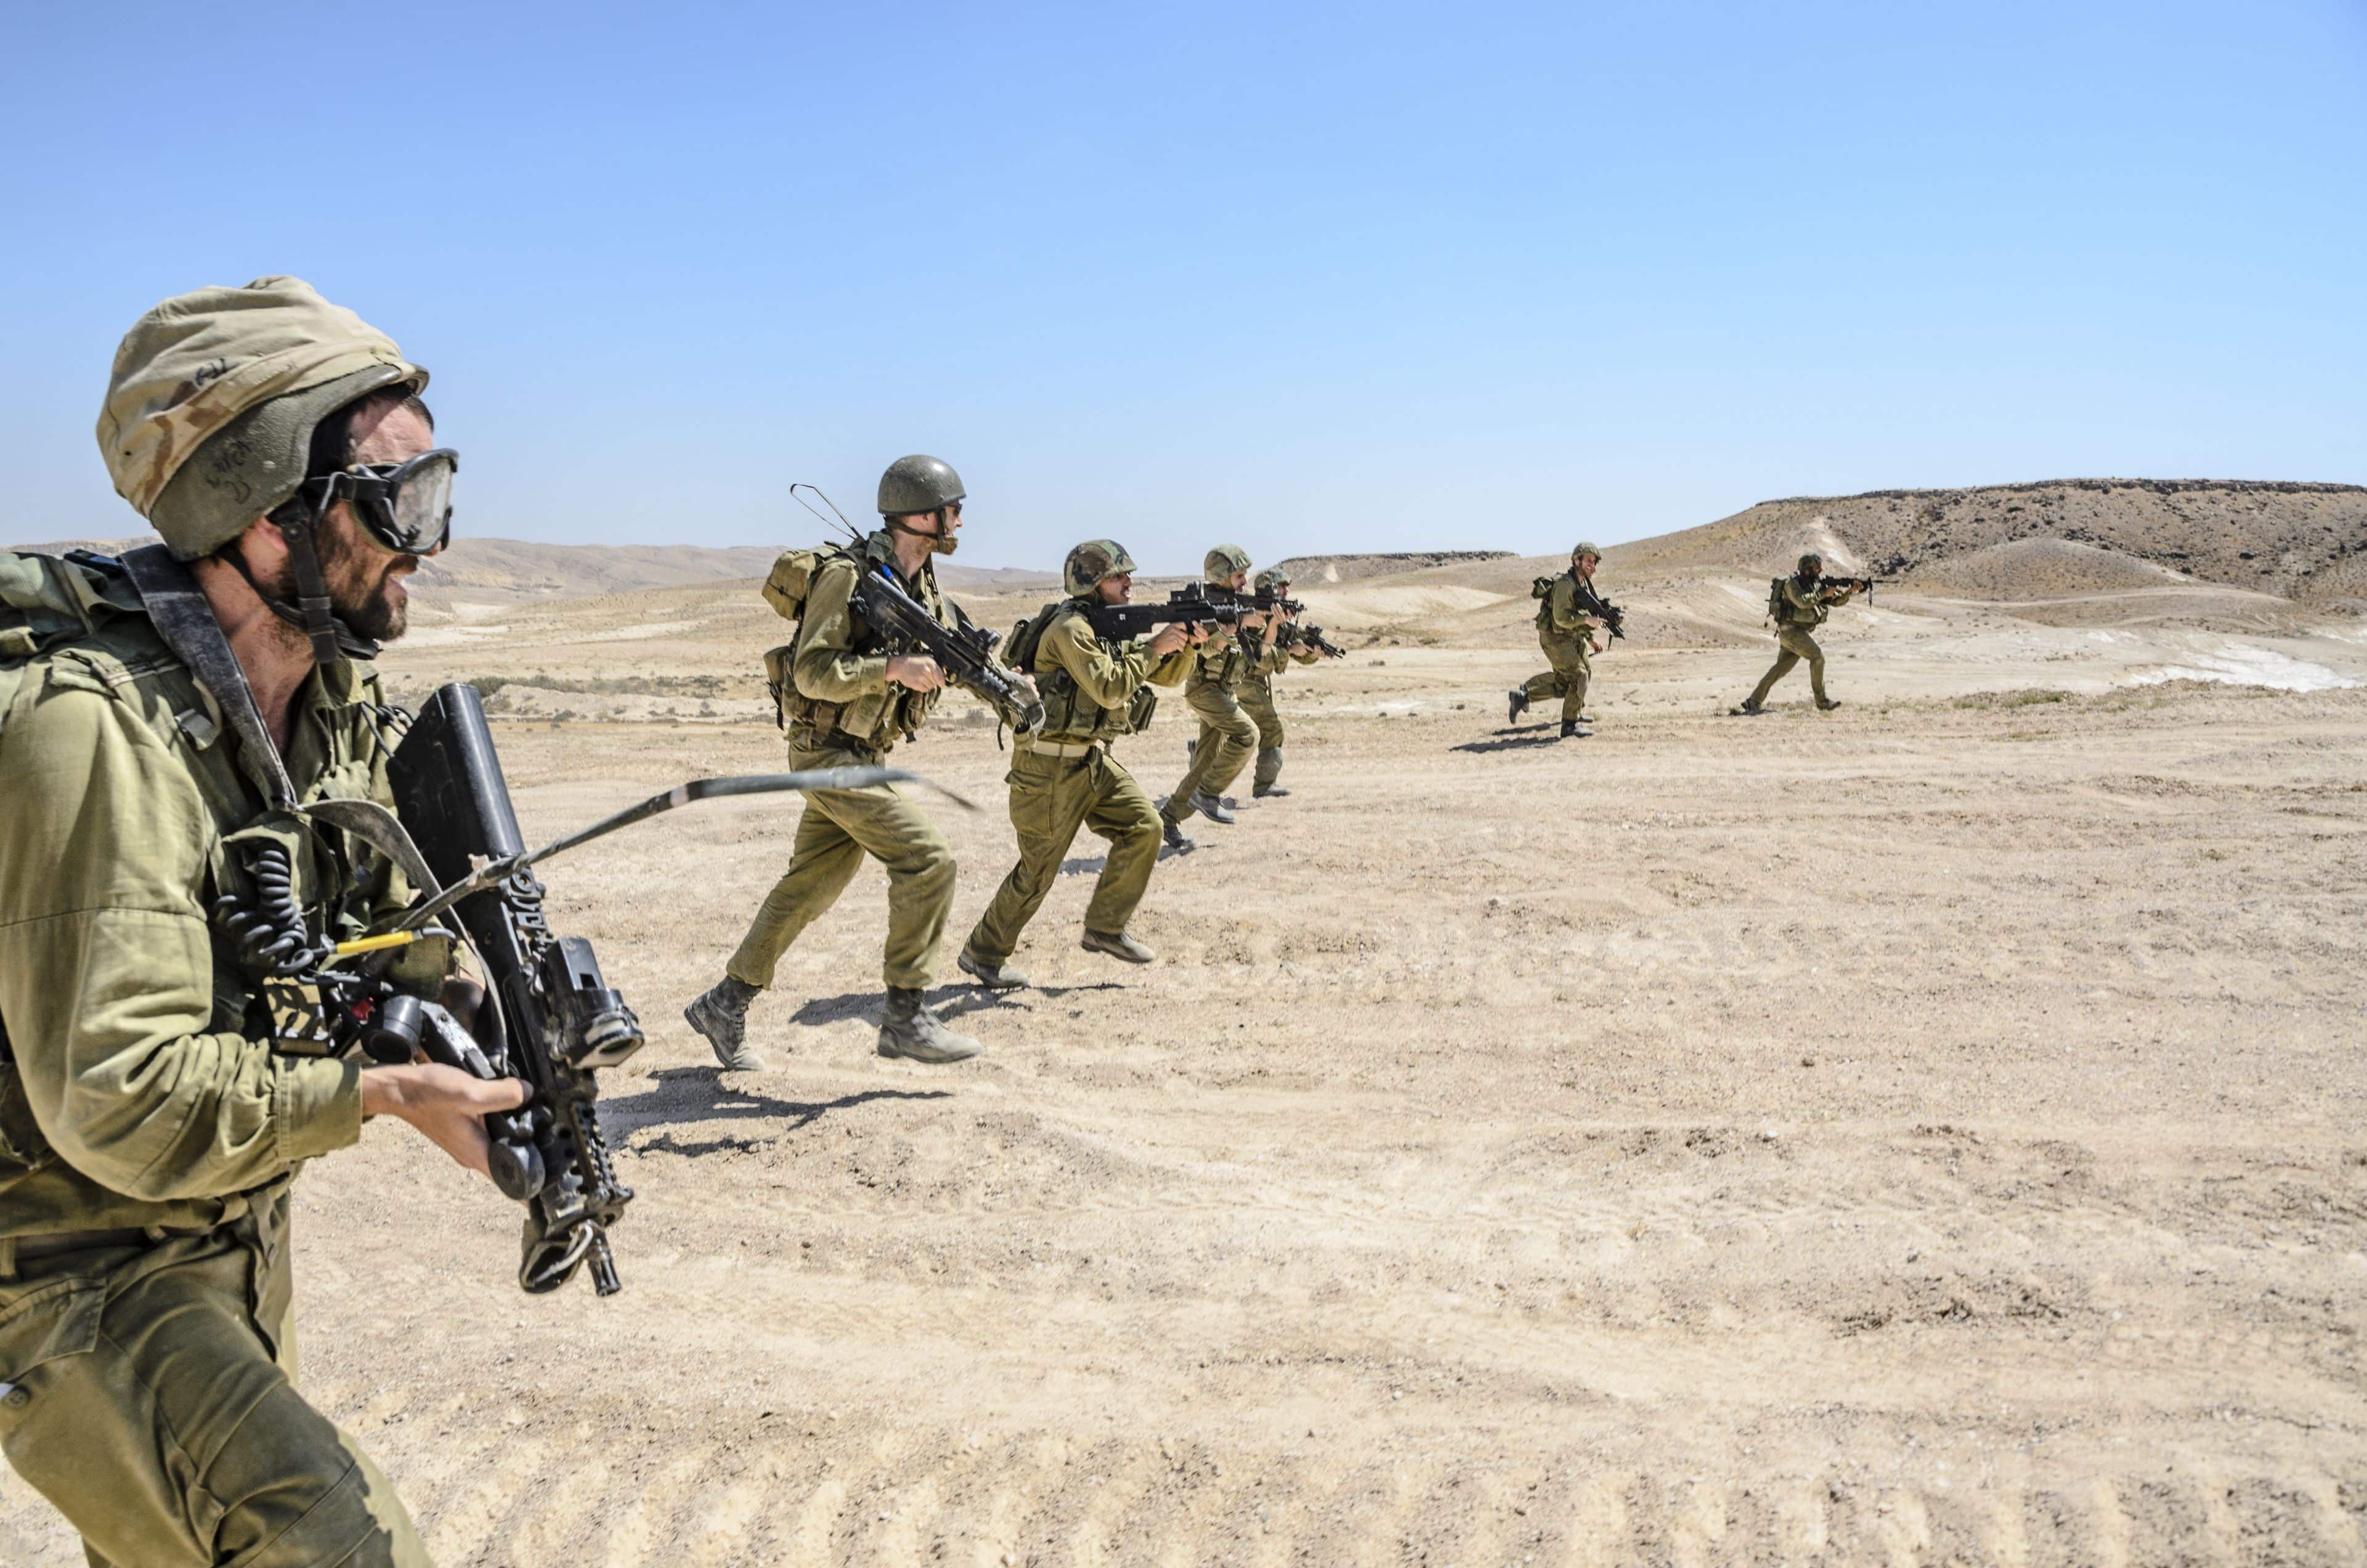 MILITARY TRAINING ZONE, ISRAEL - JUNE 17, 2015: Israeli army combat commando squad firing while charging on terror targets. Infantry soldiers running & shooting during desert military combat training.